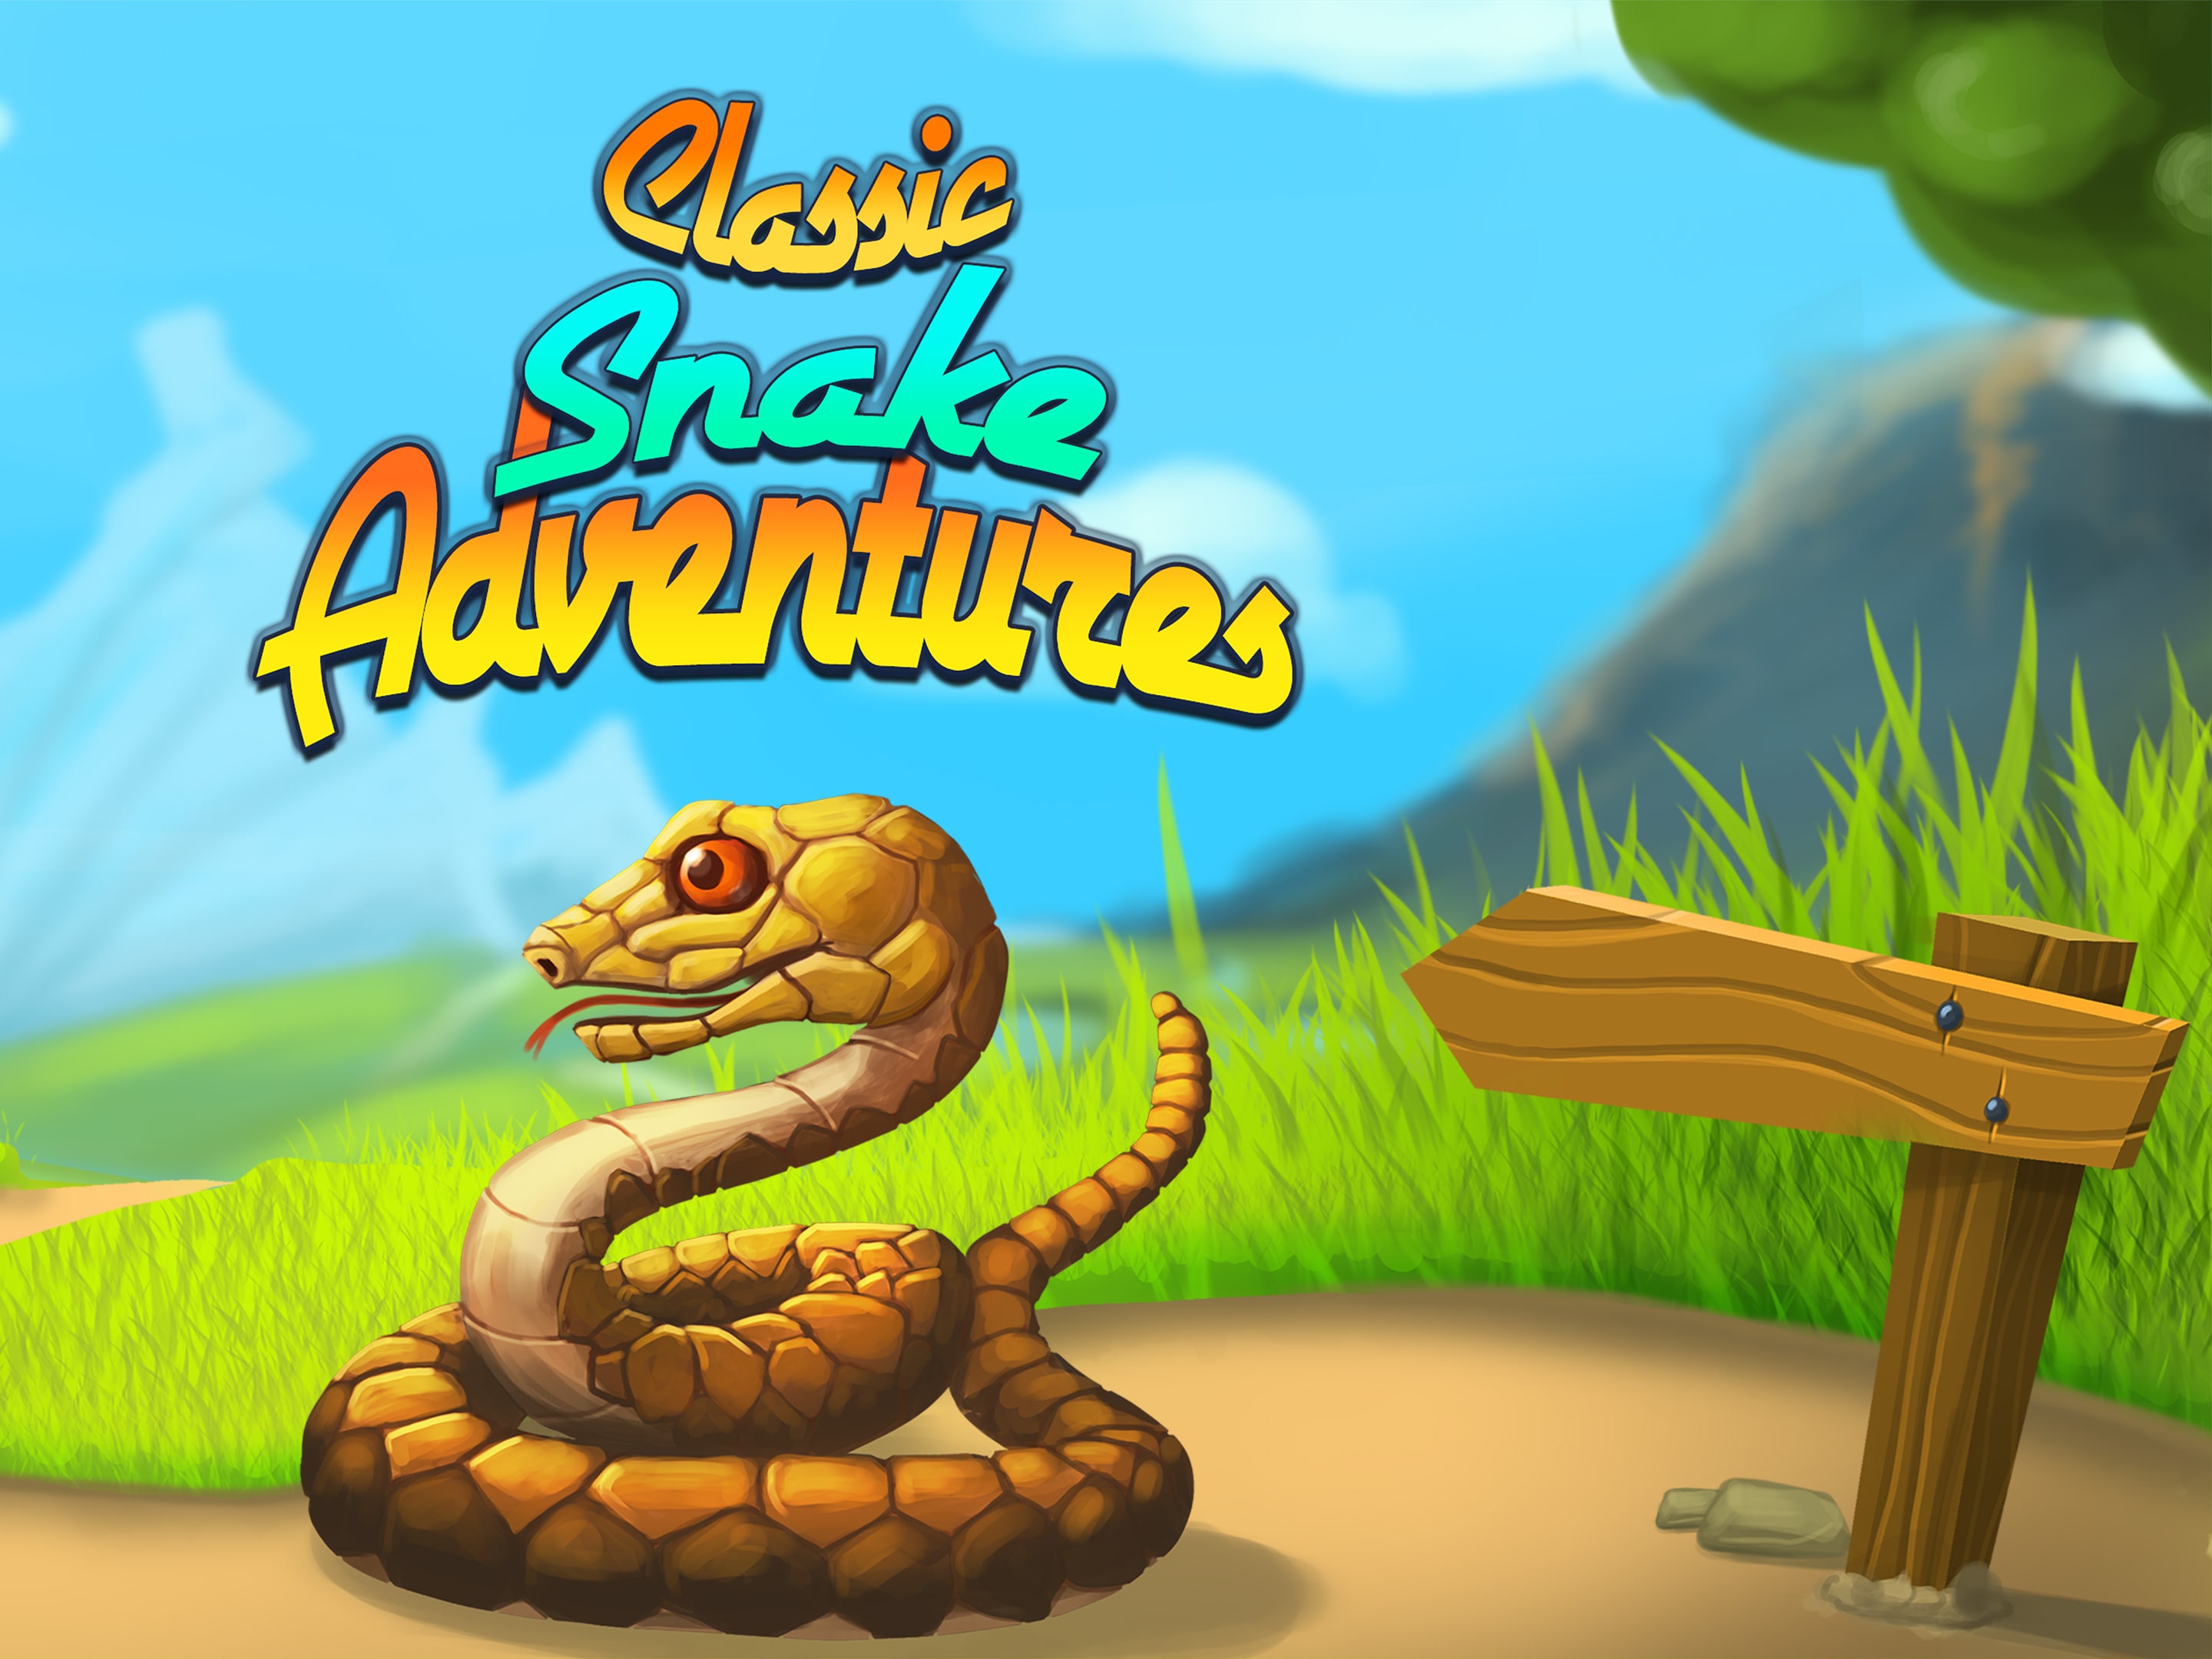 Happy Snakes on GoGy is the remastered version of an arcade classic